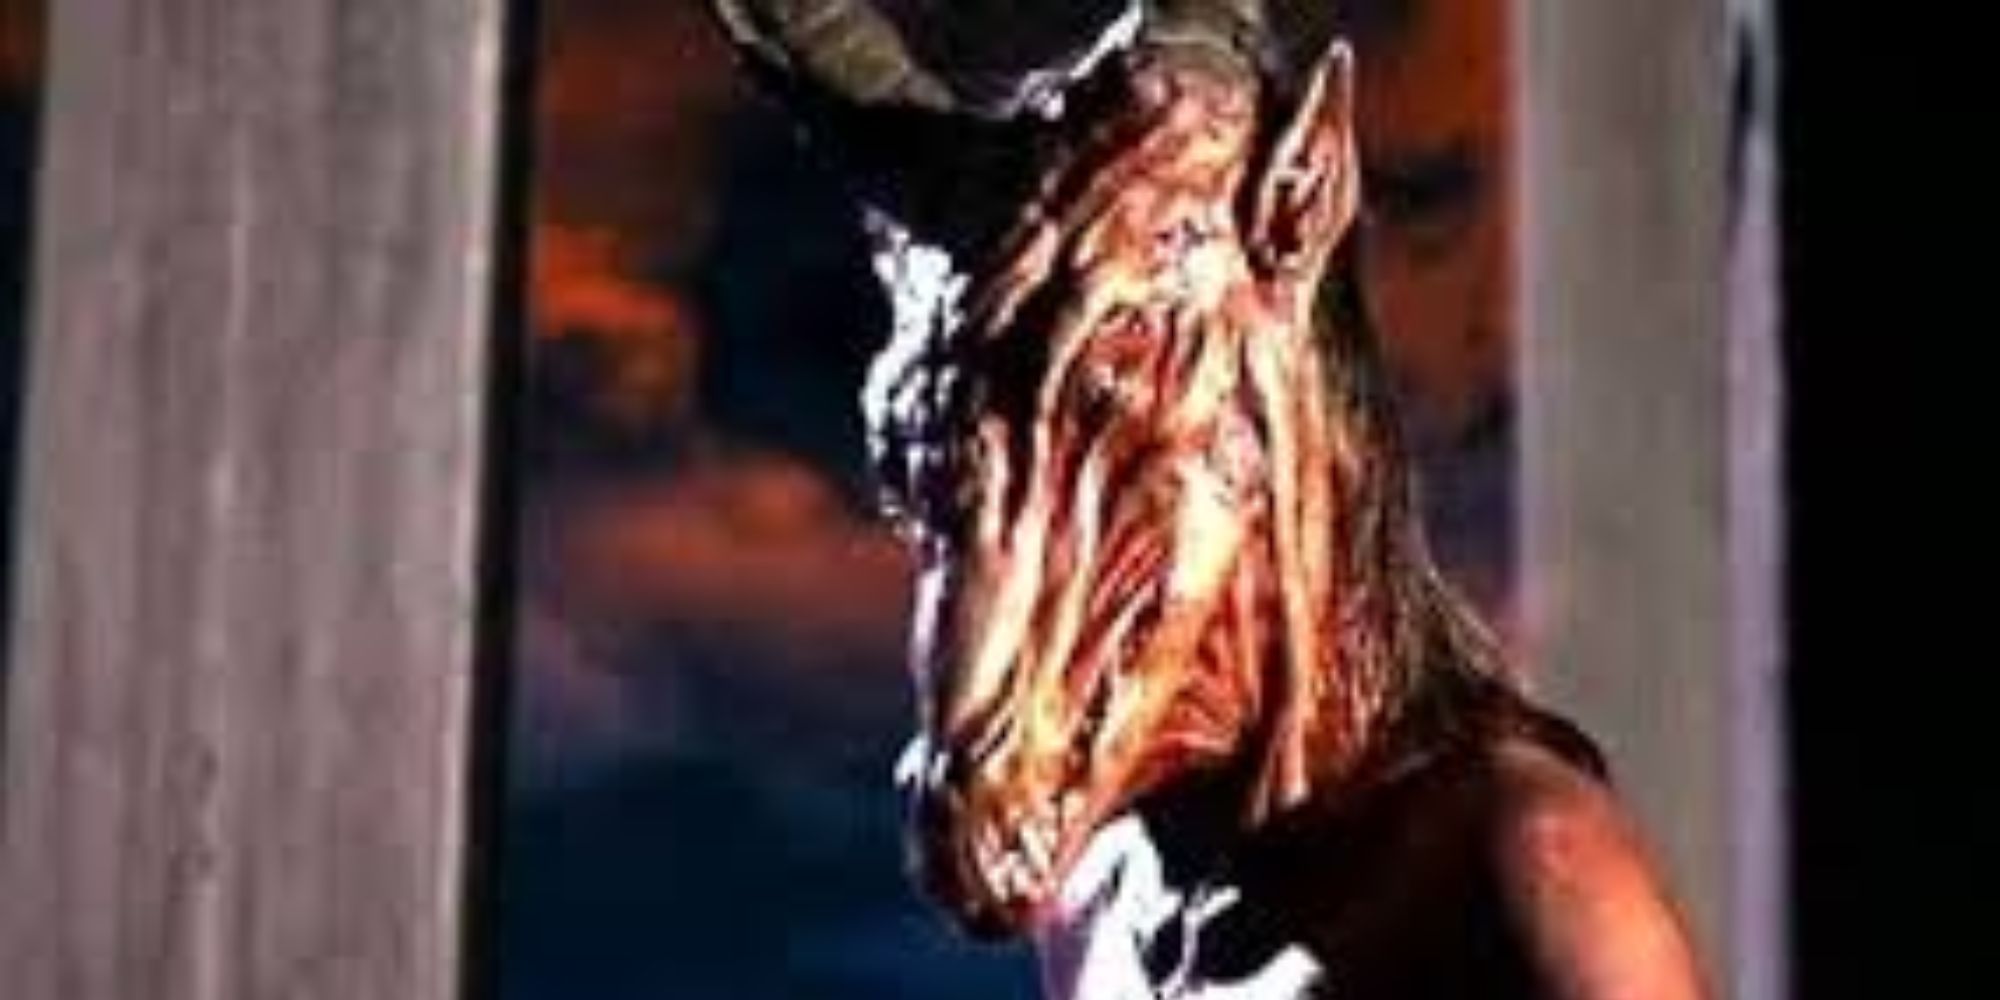 The Devil from the climax of 1995 Spanish-Italian film 'The Day of the Beast'